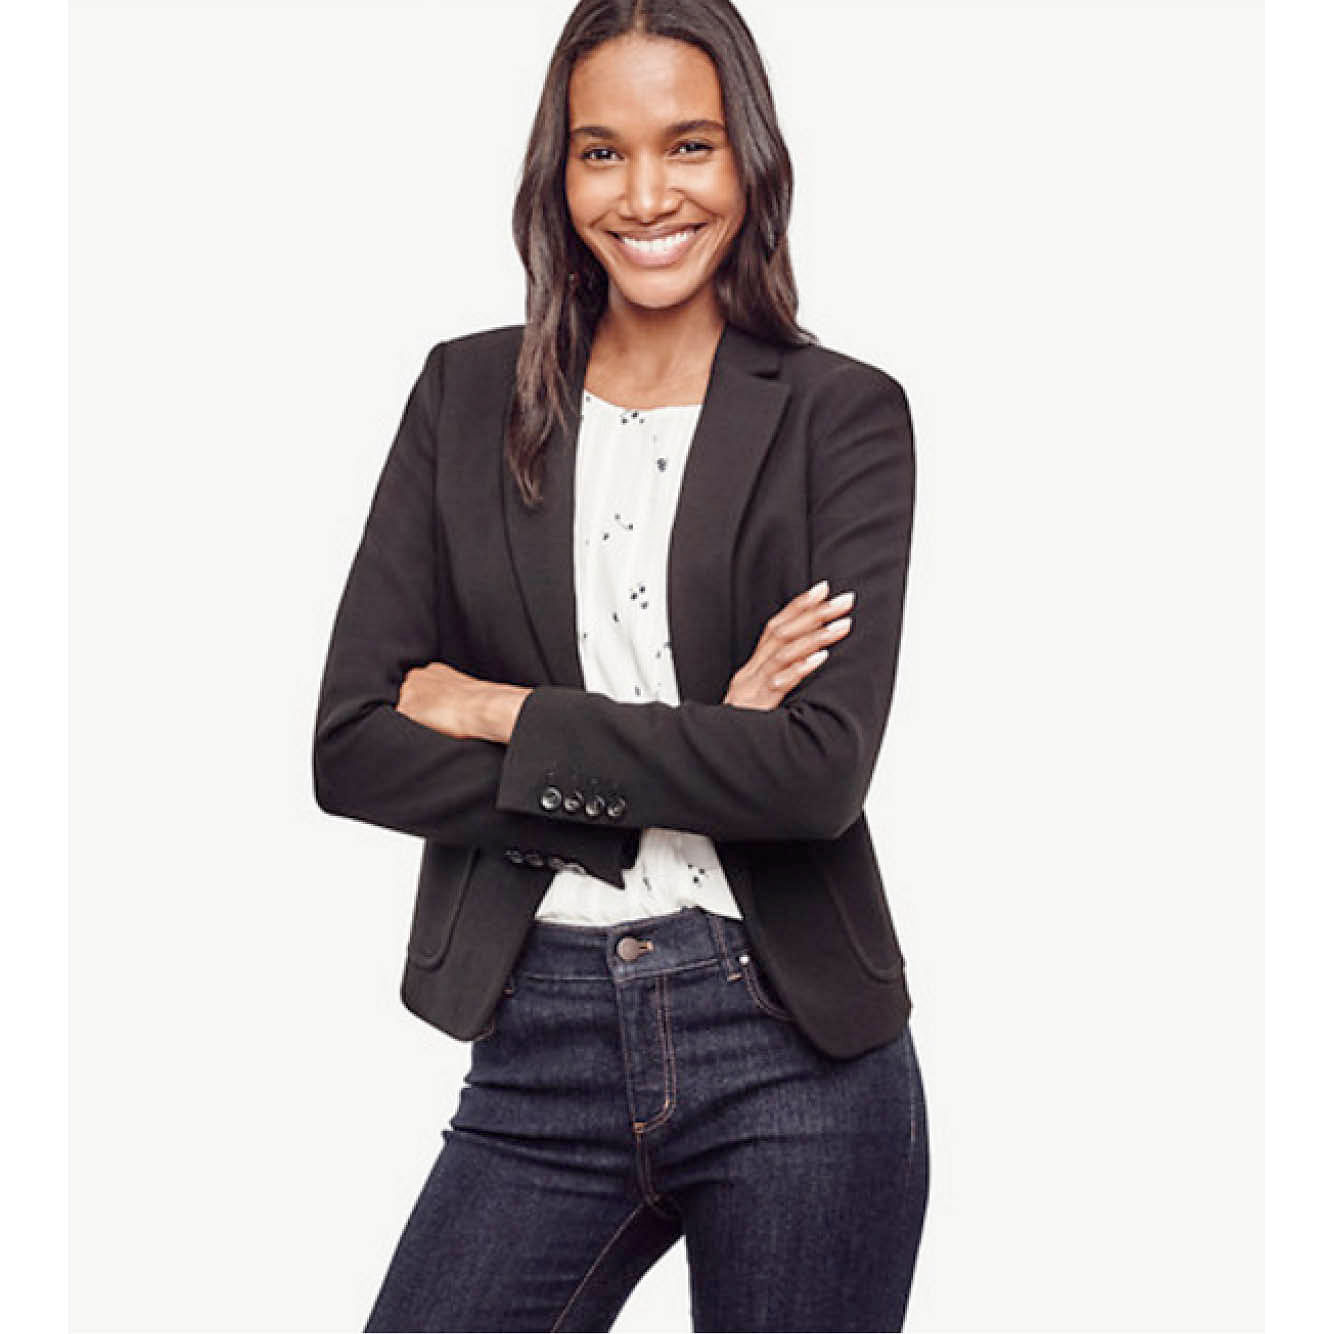 Petite Doublecloth One Button Blazer, $346.80, from www.anntaylor.com